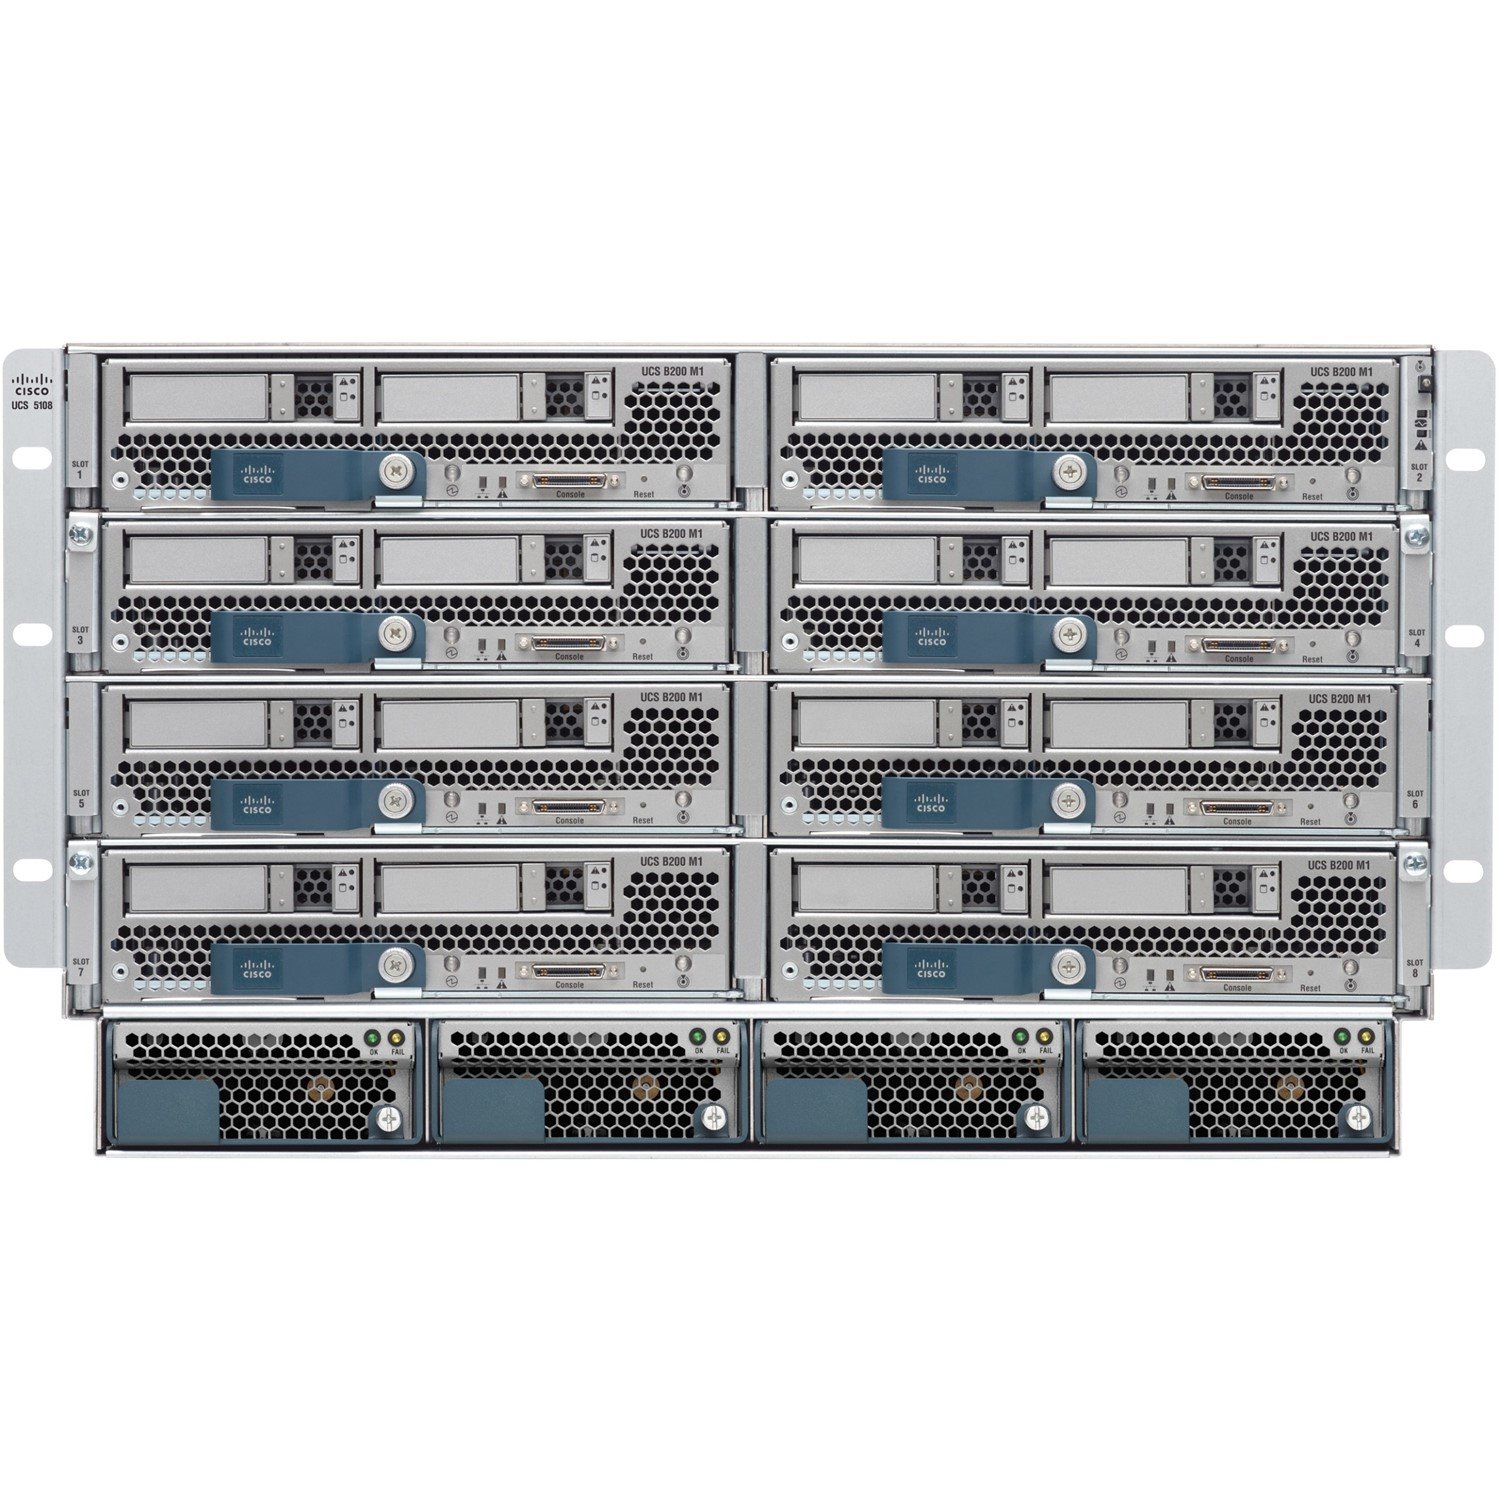 Cisco R42612 Rack And Rp Series Metered Input Pdu Installation Guide Integrating Ucs Components In The Dynamic Rack Cisco Rp Series Power Distribution Units Cisco